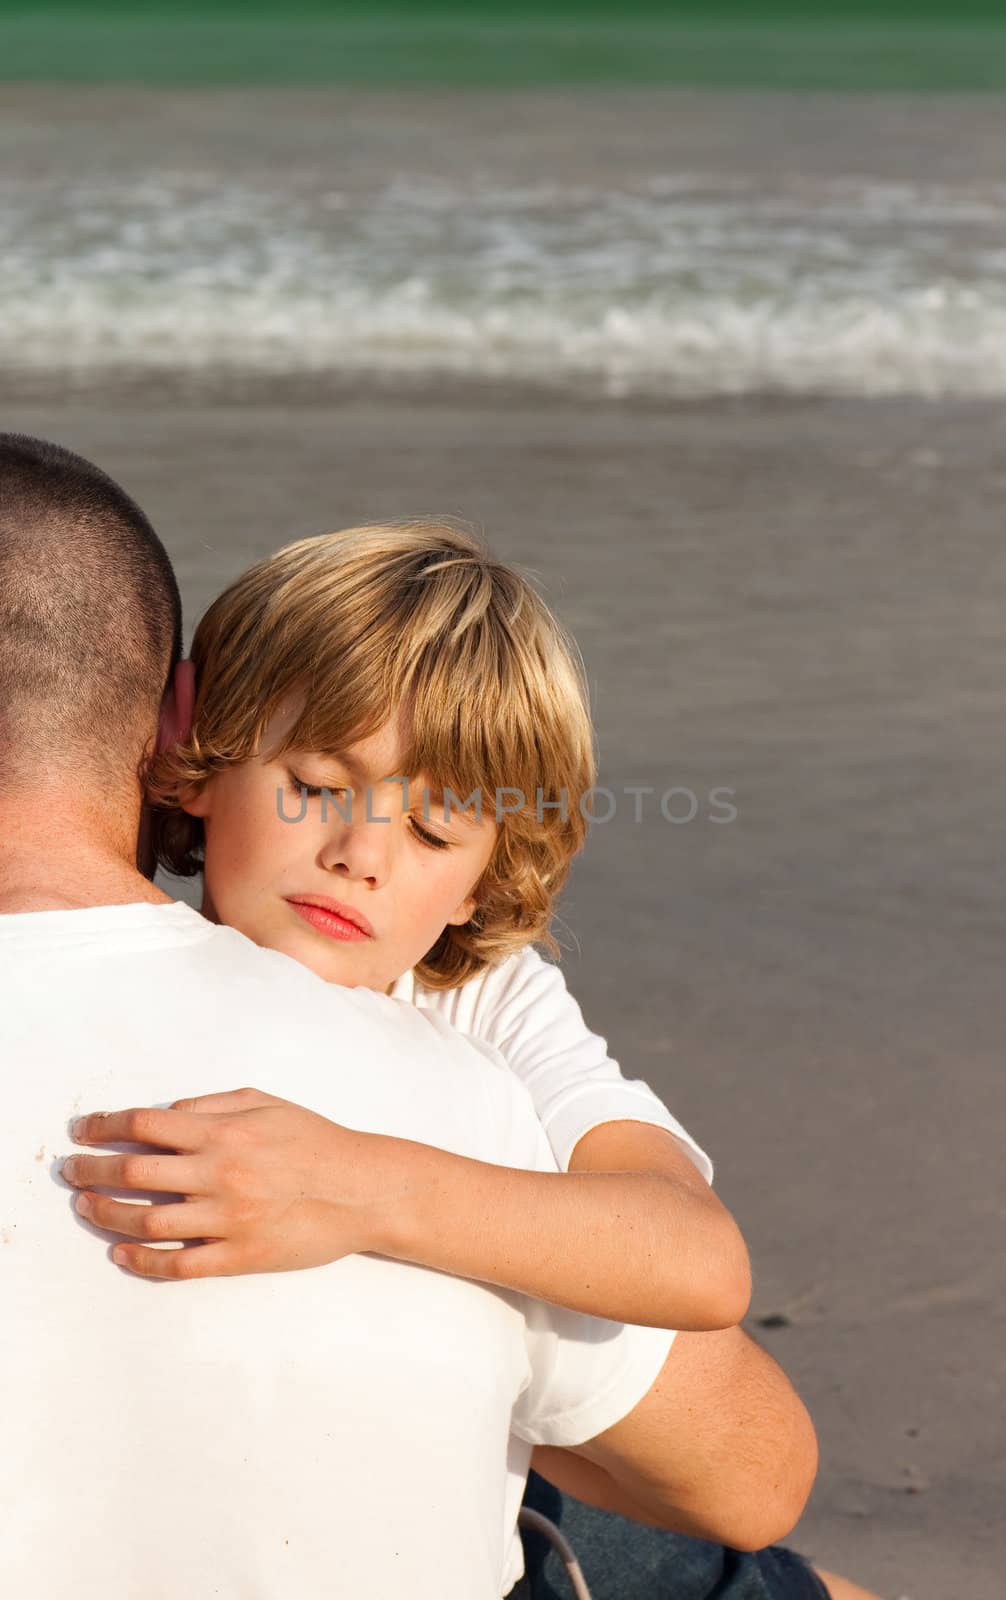 Son and his father hugging on the beach